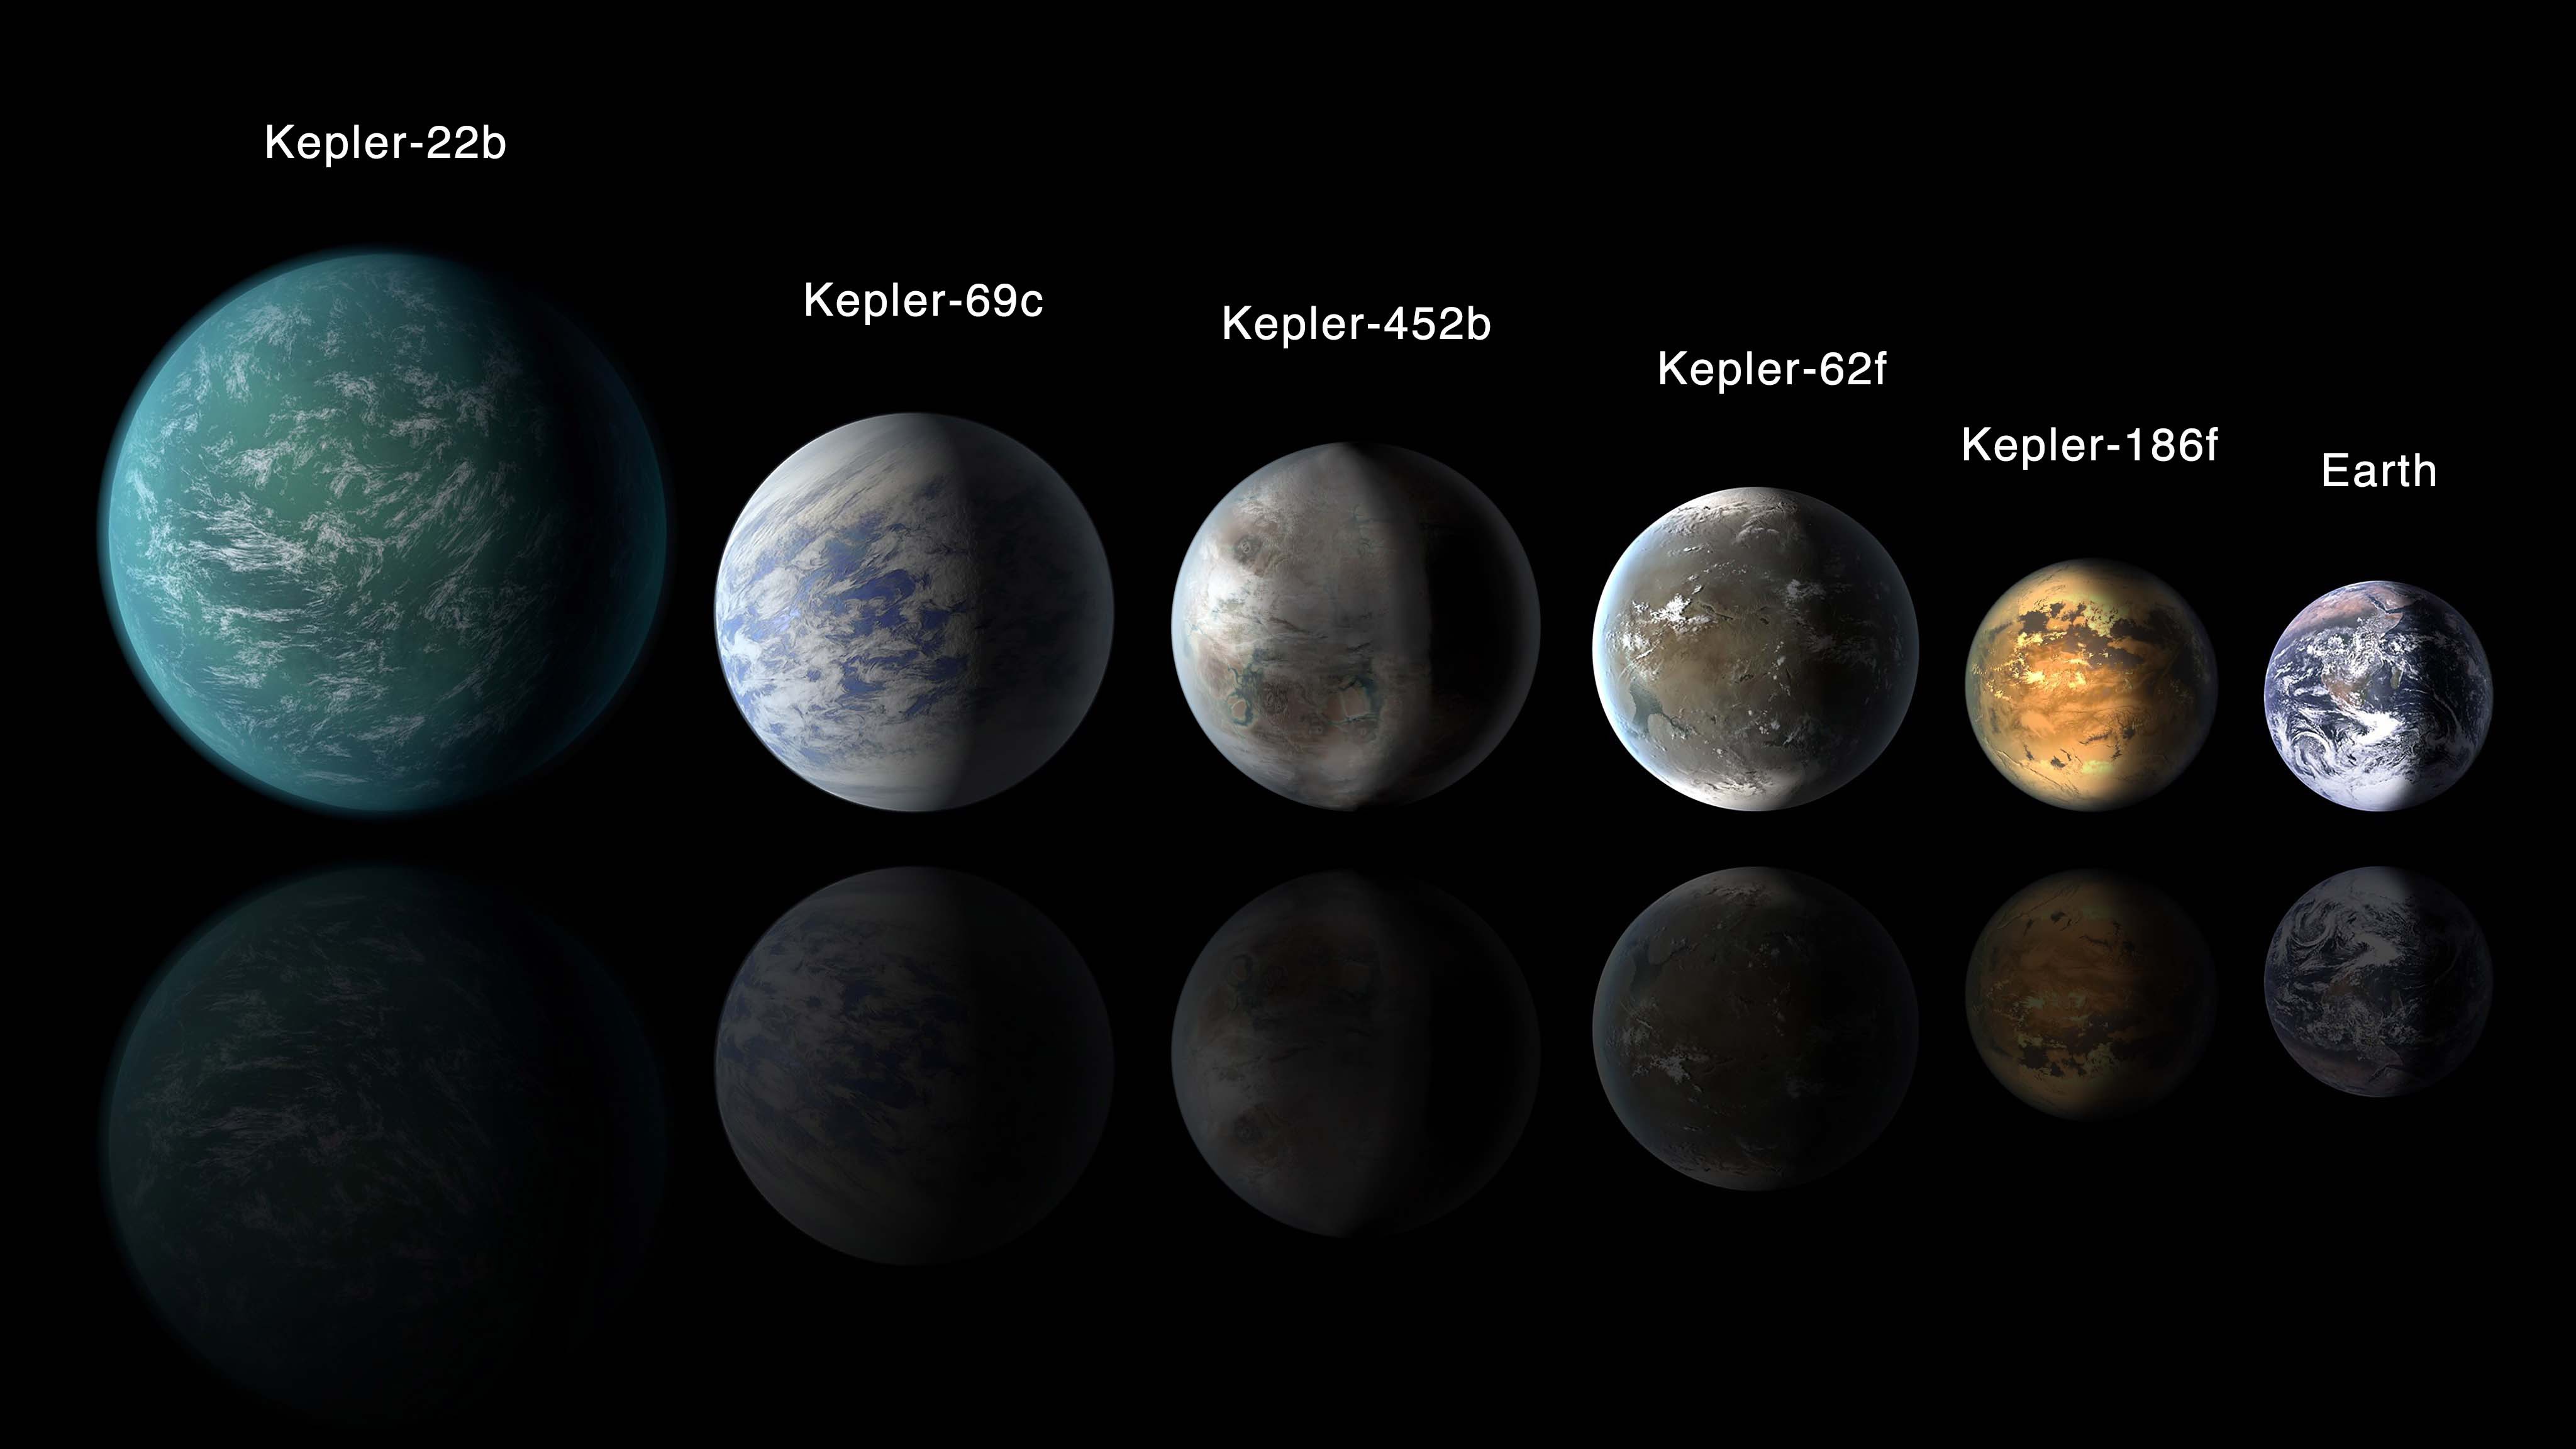 Kepler's newest planetary find joins a pantheon of planets with similarities to Earth. Image credit: NASA/Ames/JPL-Caltech